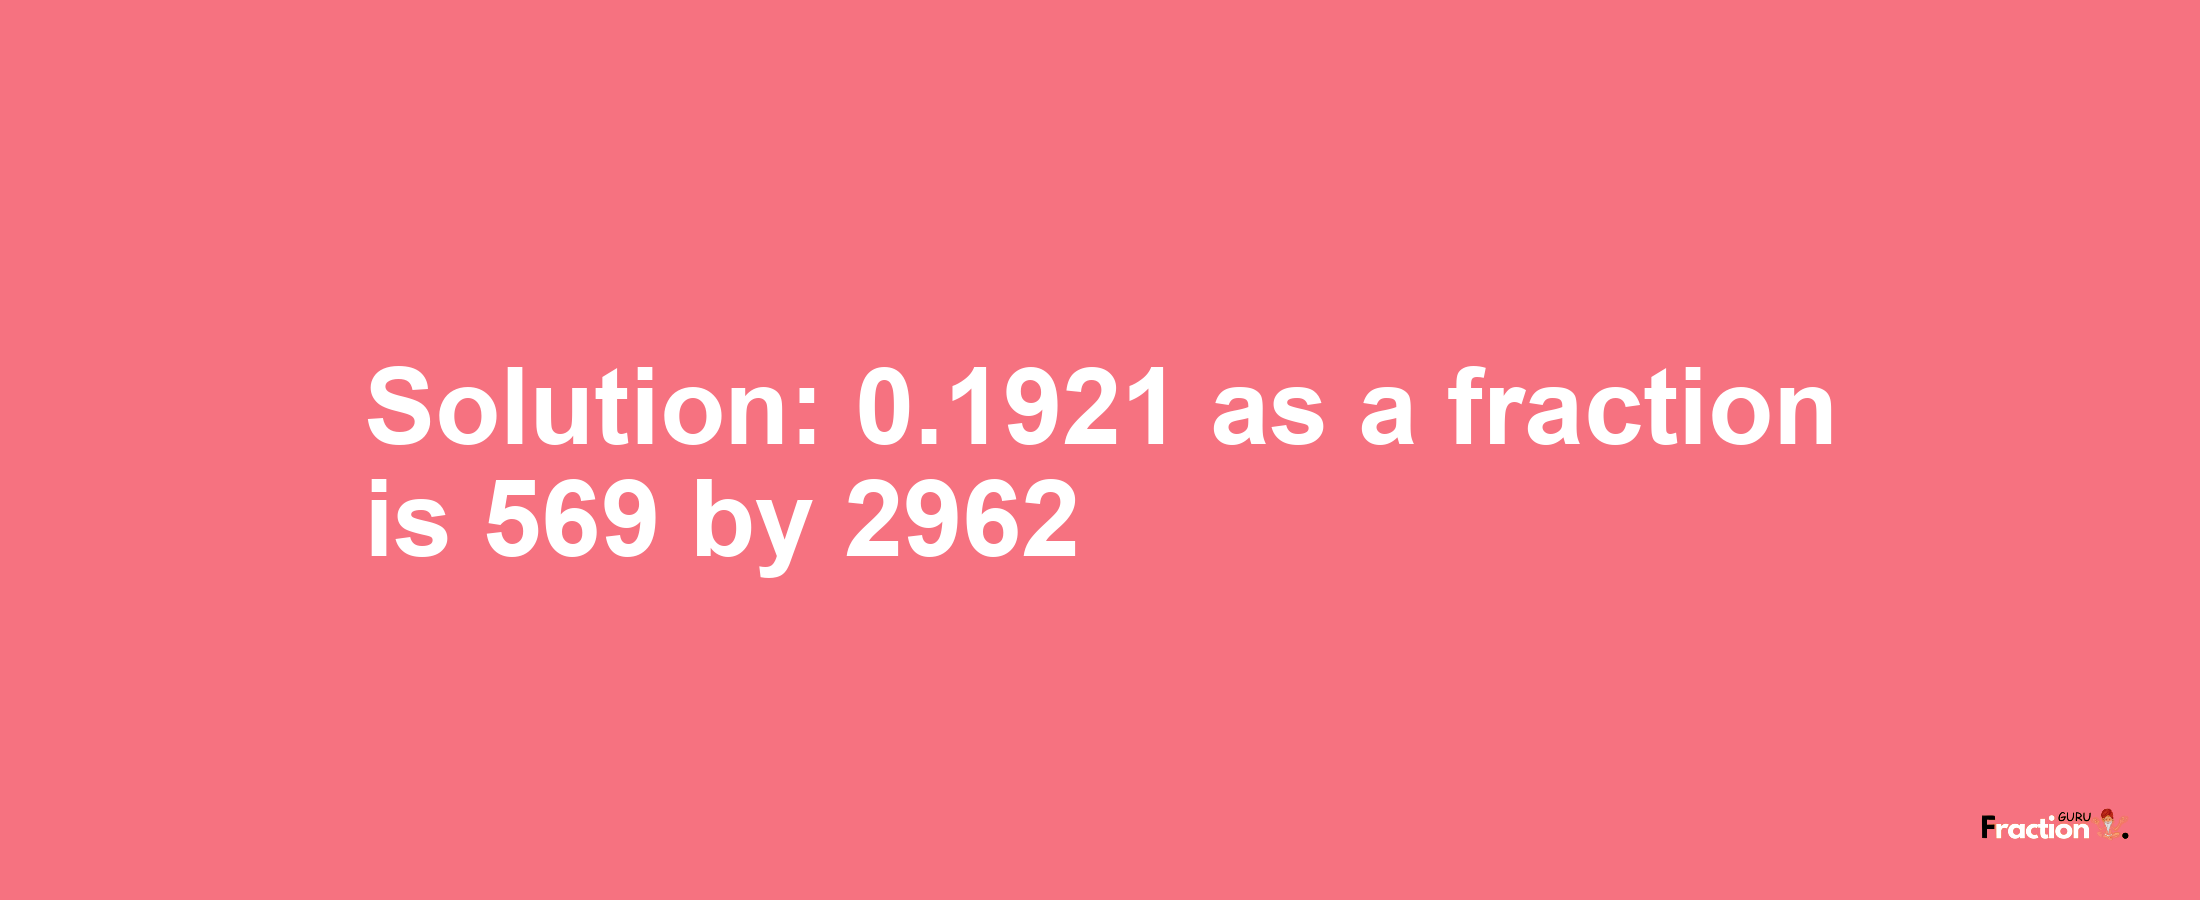 Solution:0.1921 as a fraction is 569/2962